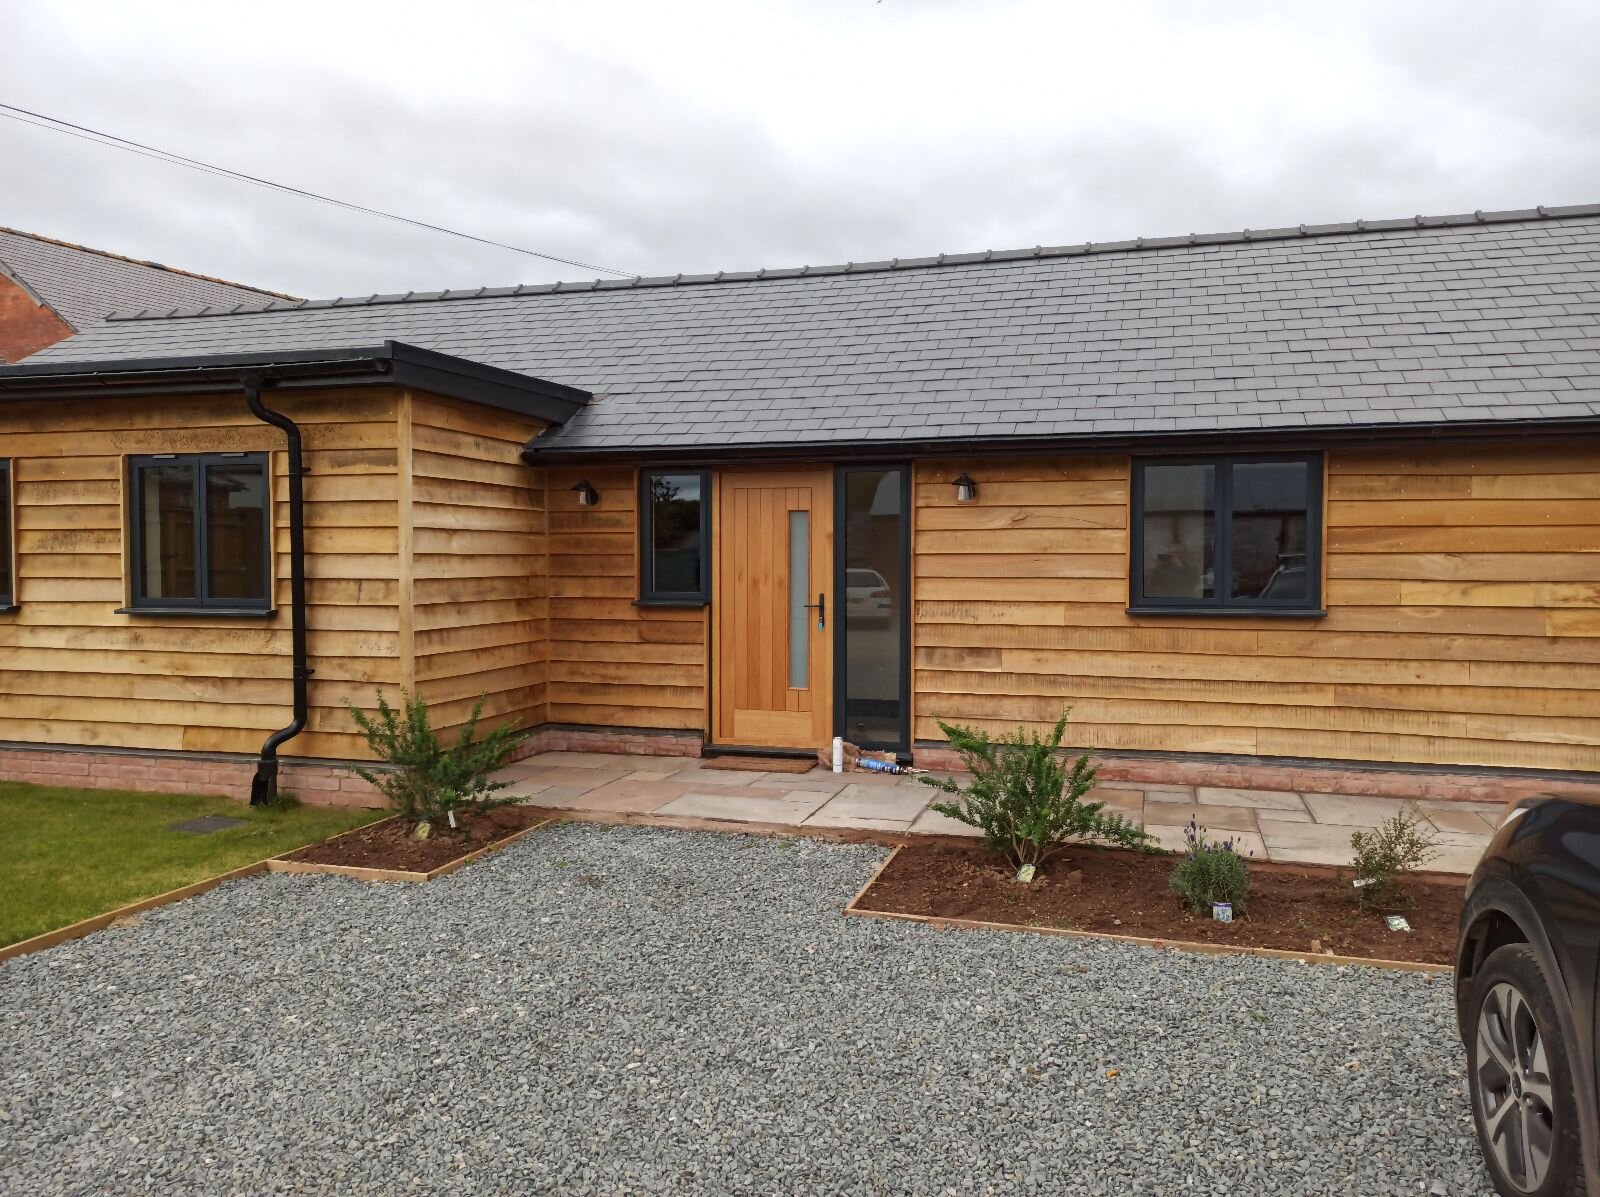 J M Joinery also supplies and fits Aluminum windows and doors as well as timber windows! We recently supplied and fitted these windows and bifold doors in converted barns in Hereford.